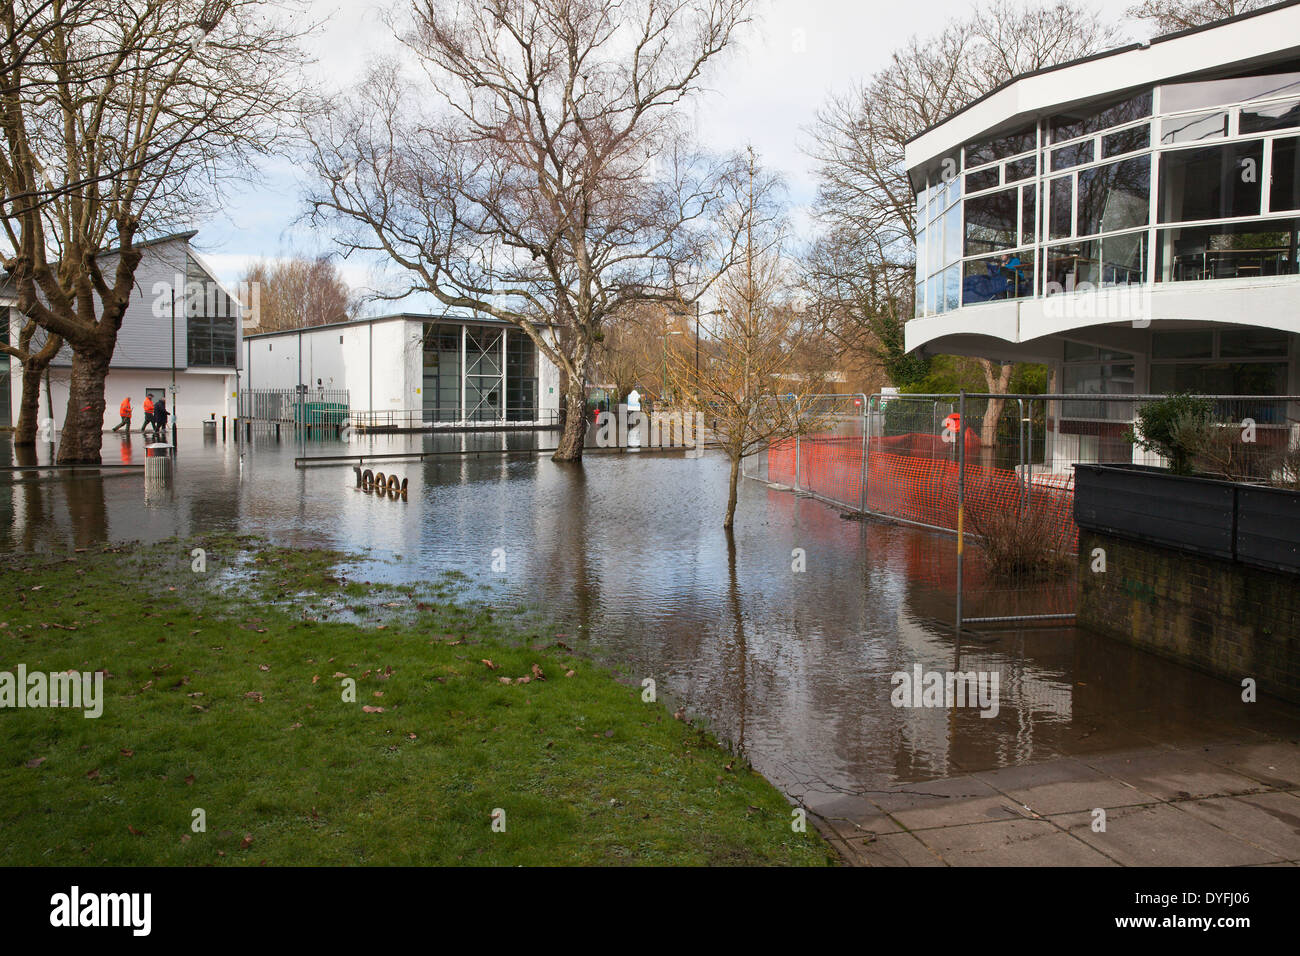 The flooded River Itchen at Park Avenue and Winchester School of Art, Hampshire, England, UK.  Flooding is becoming more frequent with climate change. Stock Photo